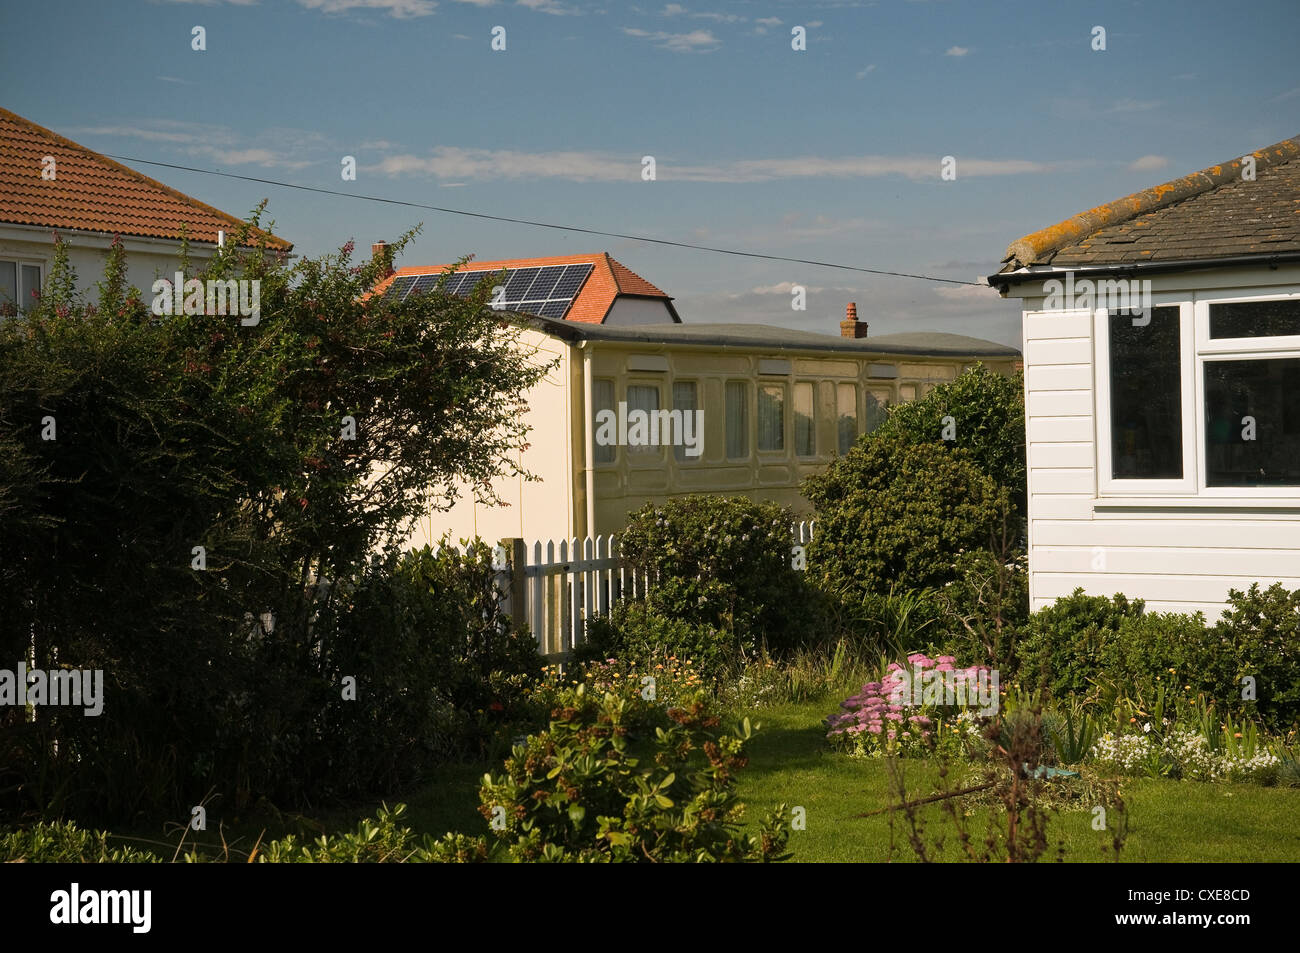 House created from old railway carriages in East Wittering, West Sussex, UK Stock Photo